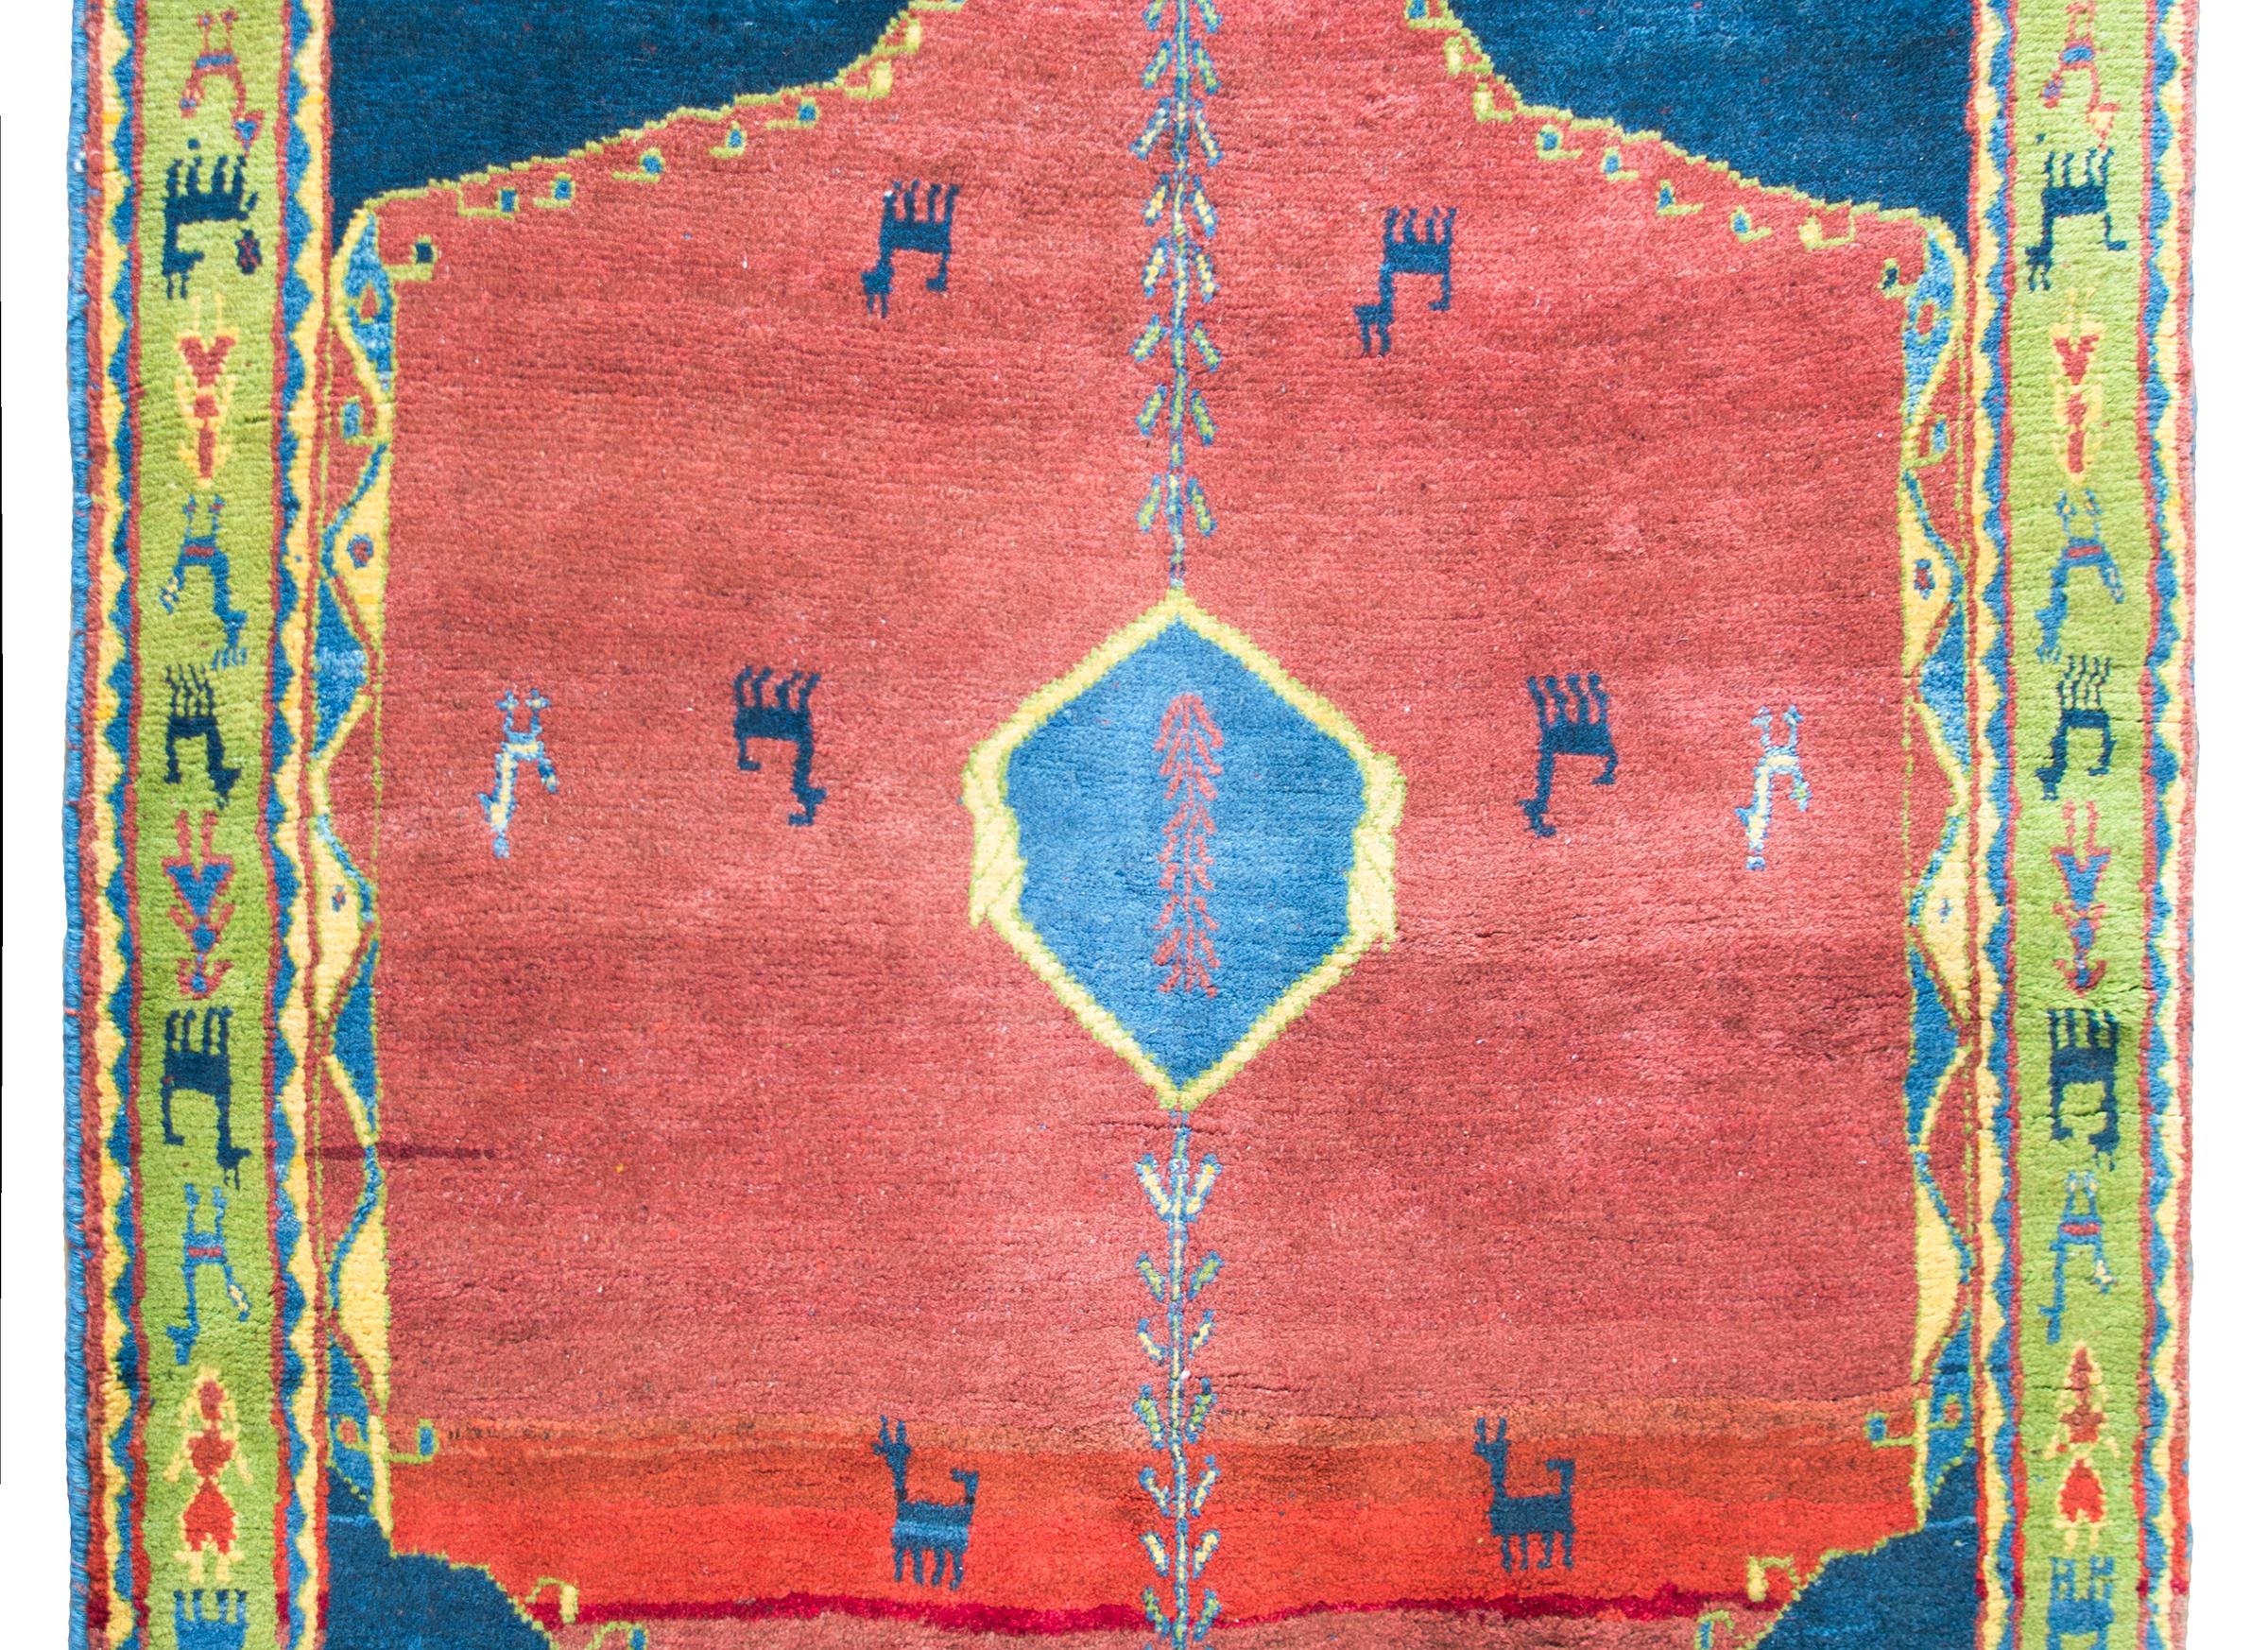 A fantastic mid-20th century Persian Gabbeh rug with an abrash crimson field dotted with indigo goats and chickens, and surrounded by a wide border with a whimsical pattern of repeated goats, chickens, people and stylized flowers, woven in light and